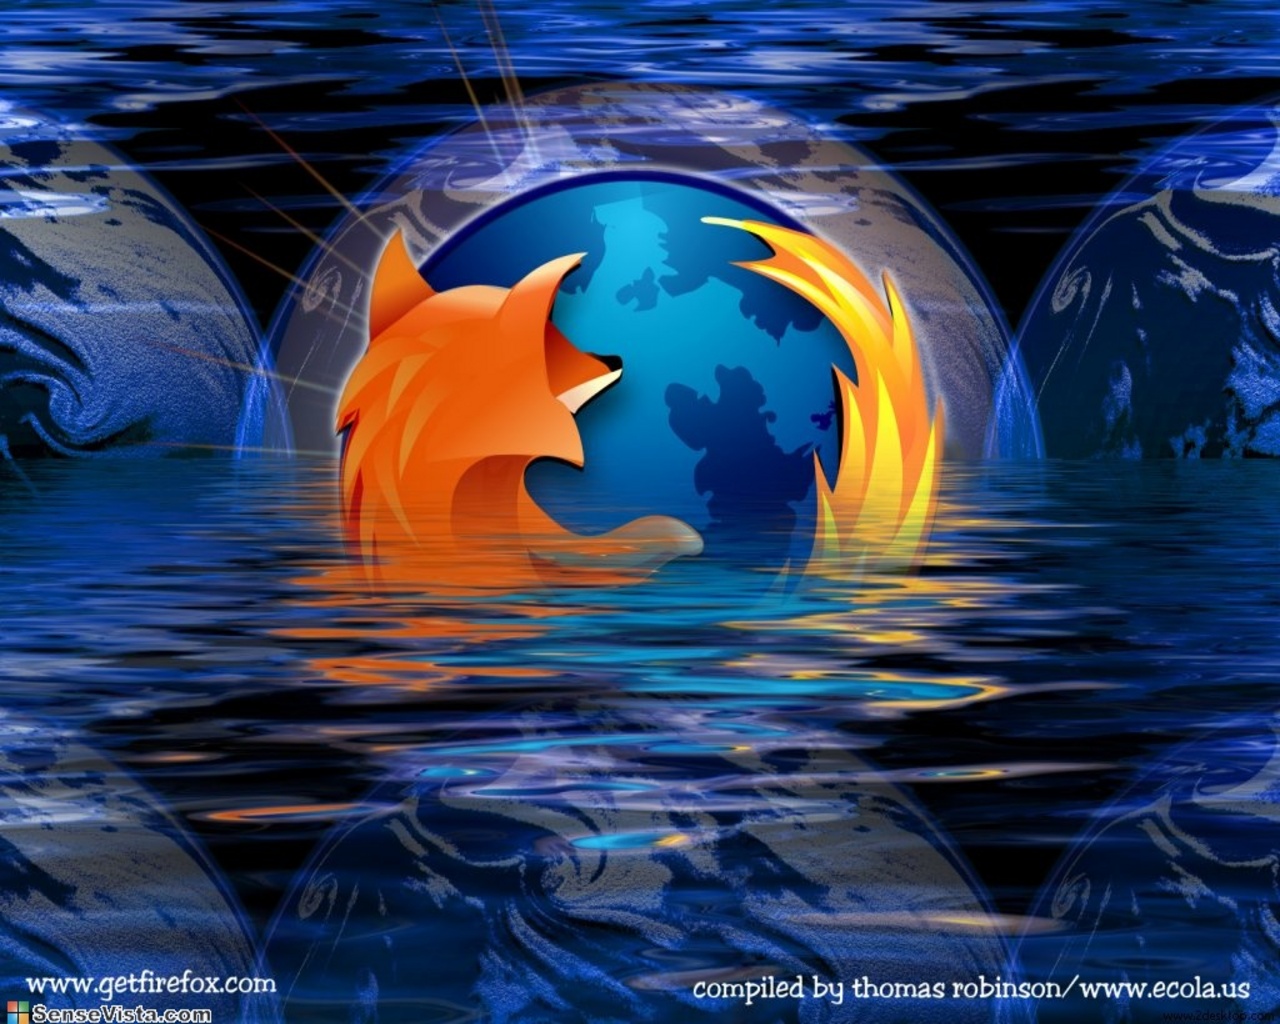 Ago August 27th The Mozilla Firefox Web Browser And